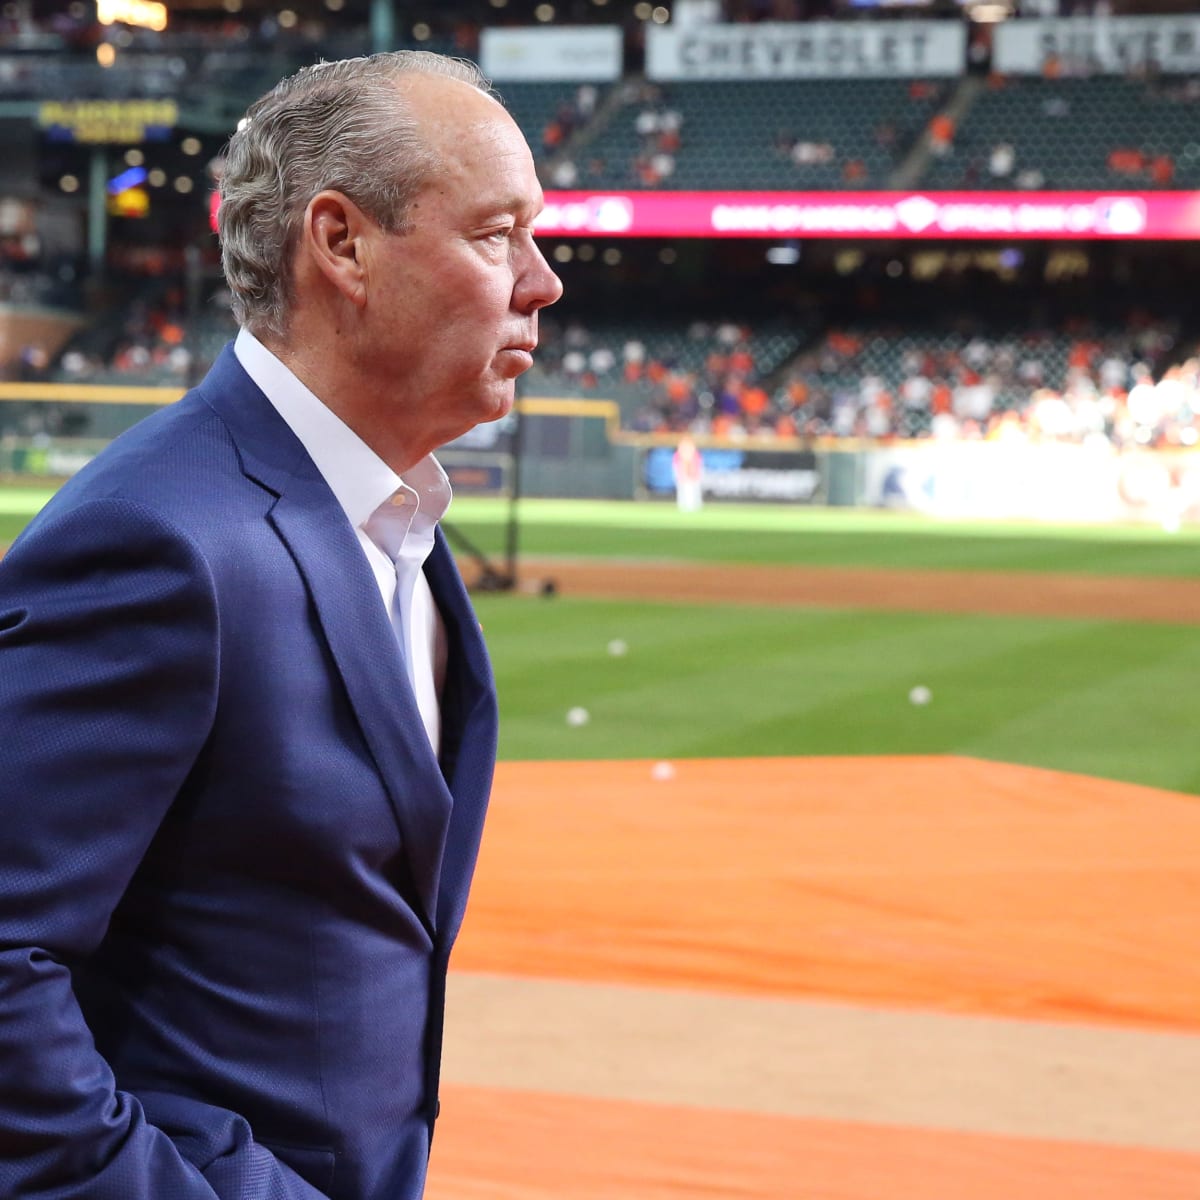 Astros apologize again for sign stealing, but owner Jim Crane says